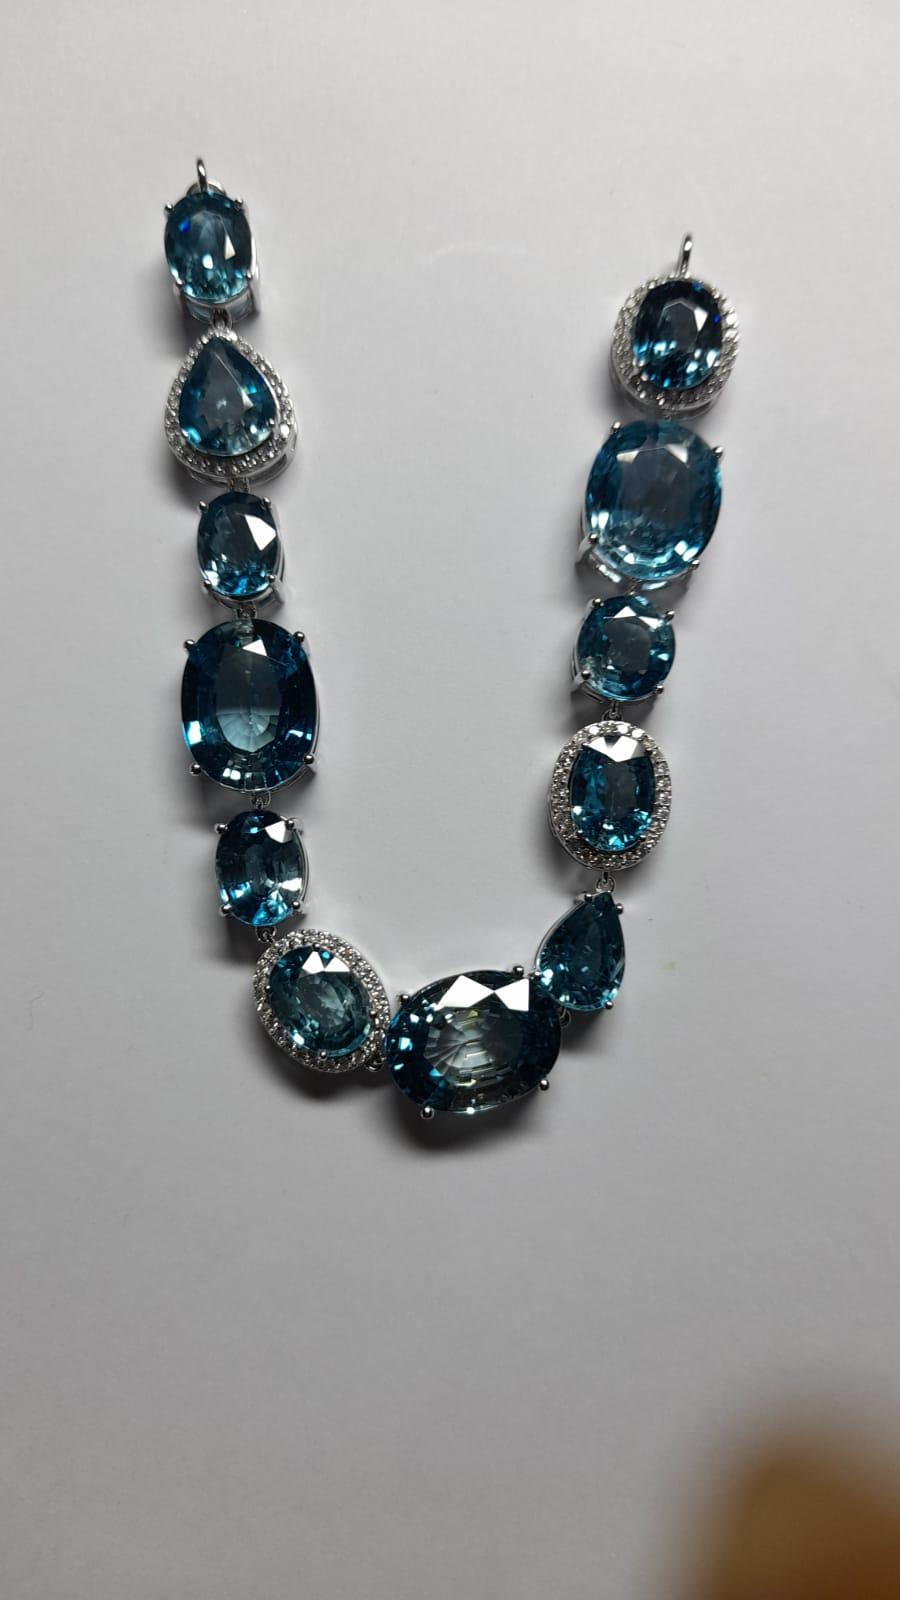 Mixed Cut 81.06 ct Blue Zircon Bracelet With Diamonds Made In 18k Gold For Sale